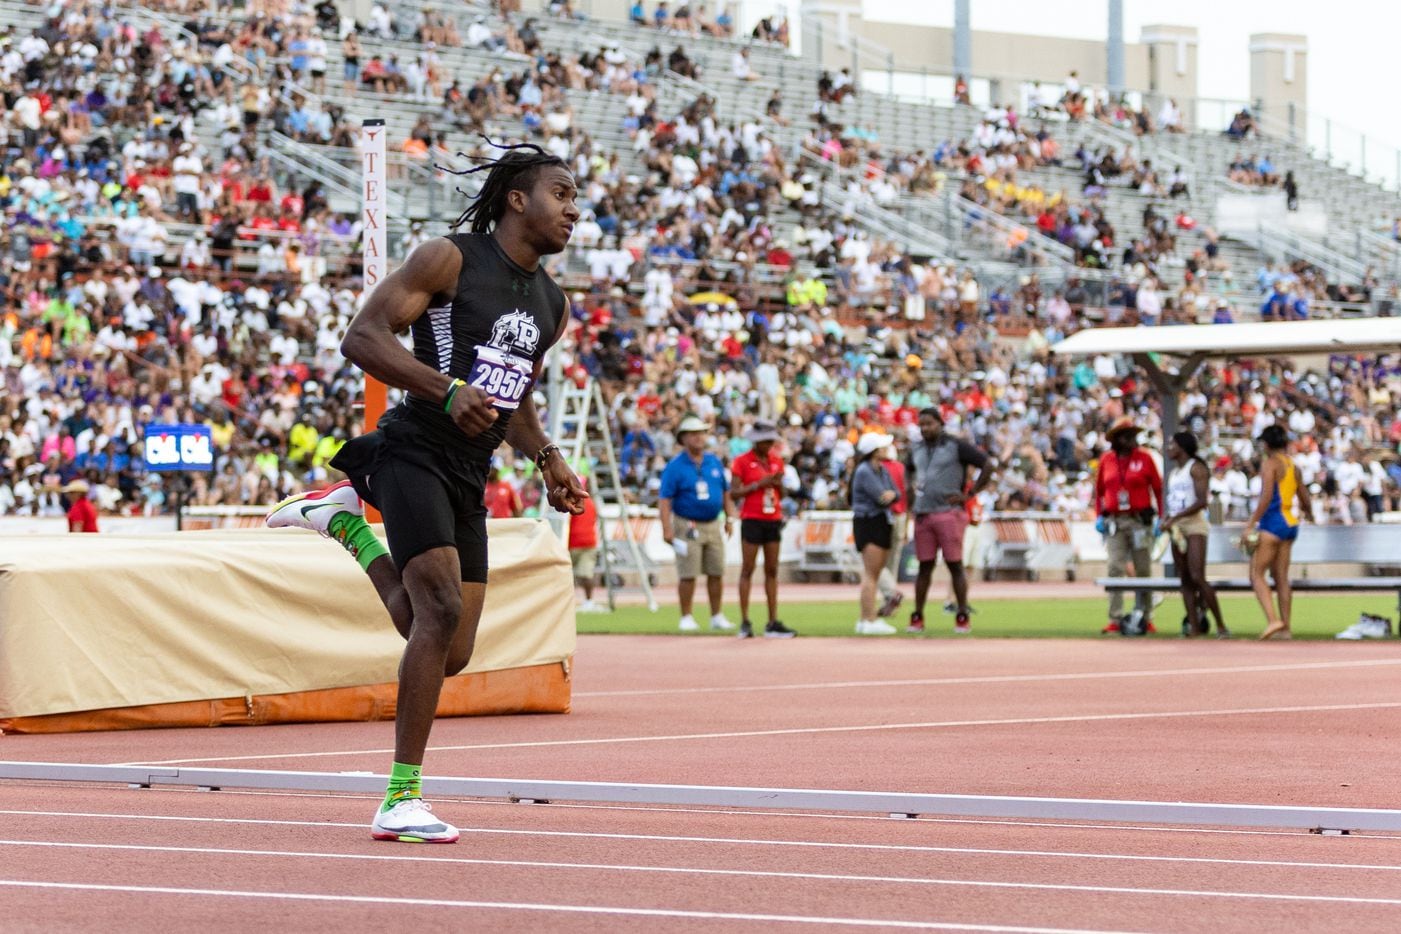 Dominic Byles of Mansfield Lake Ridge races in the boys’ 400-meter dash at the UIL Track &...